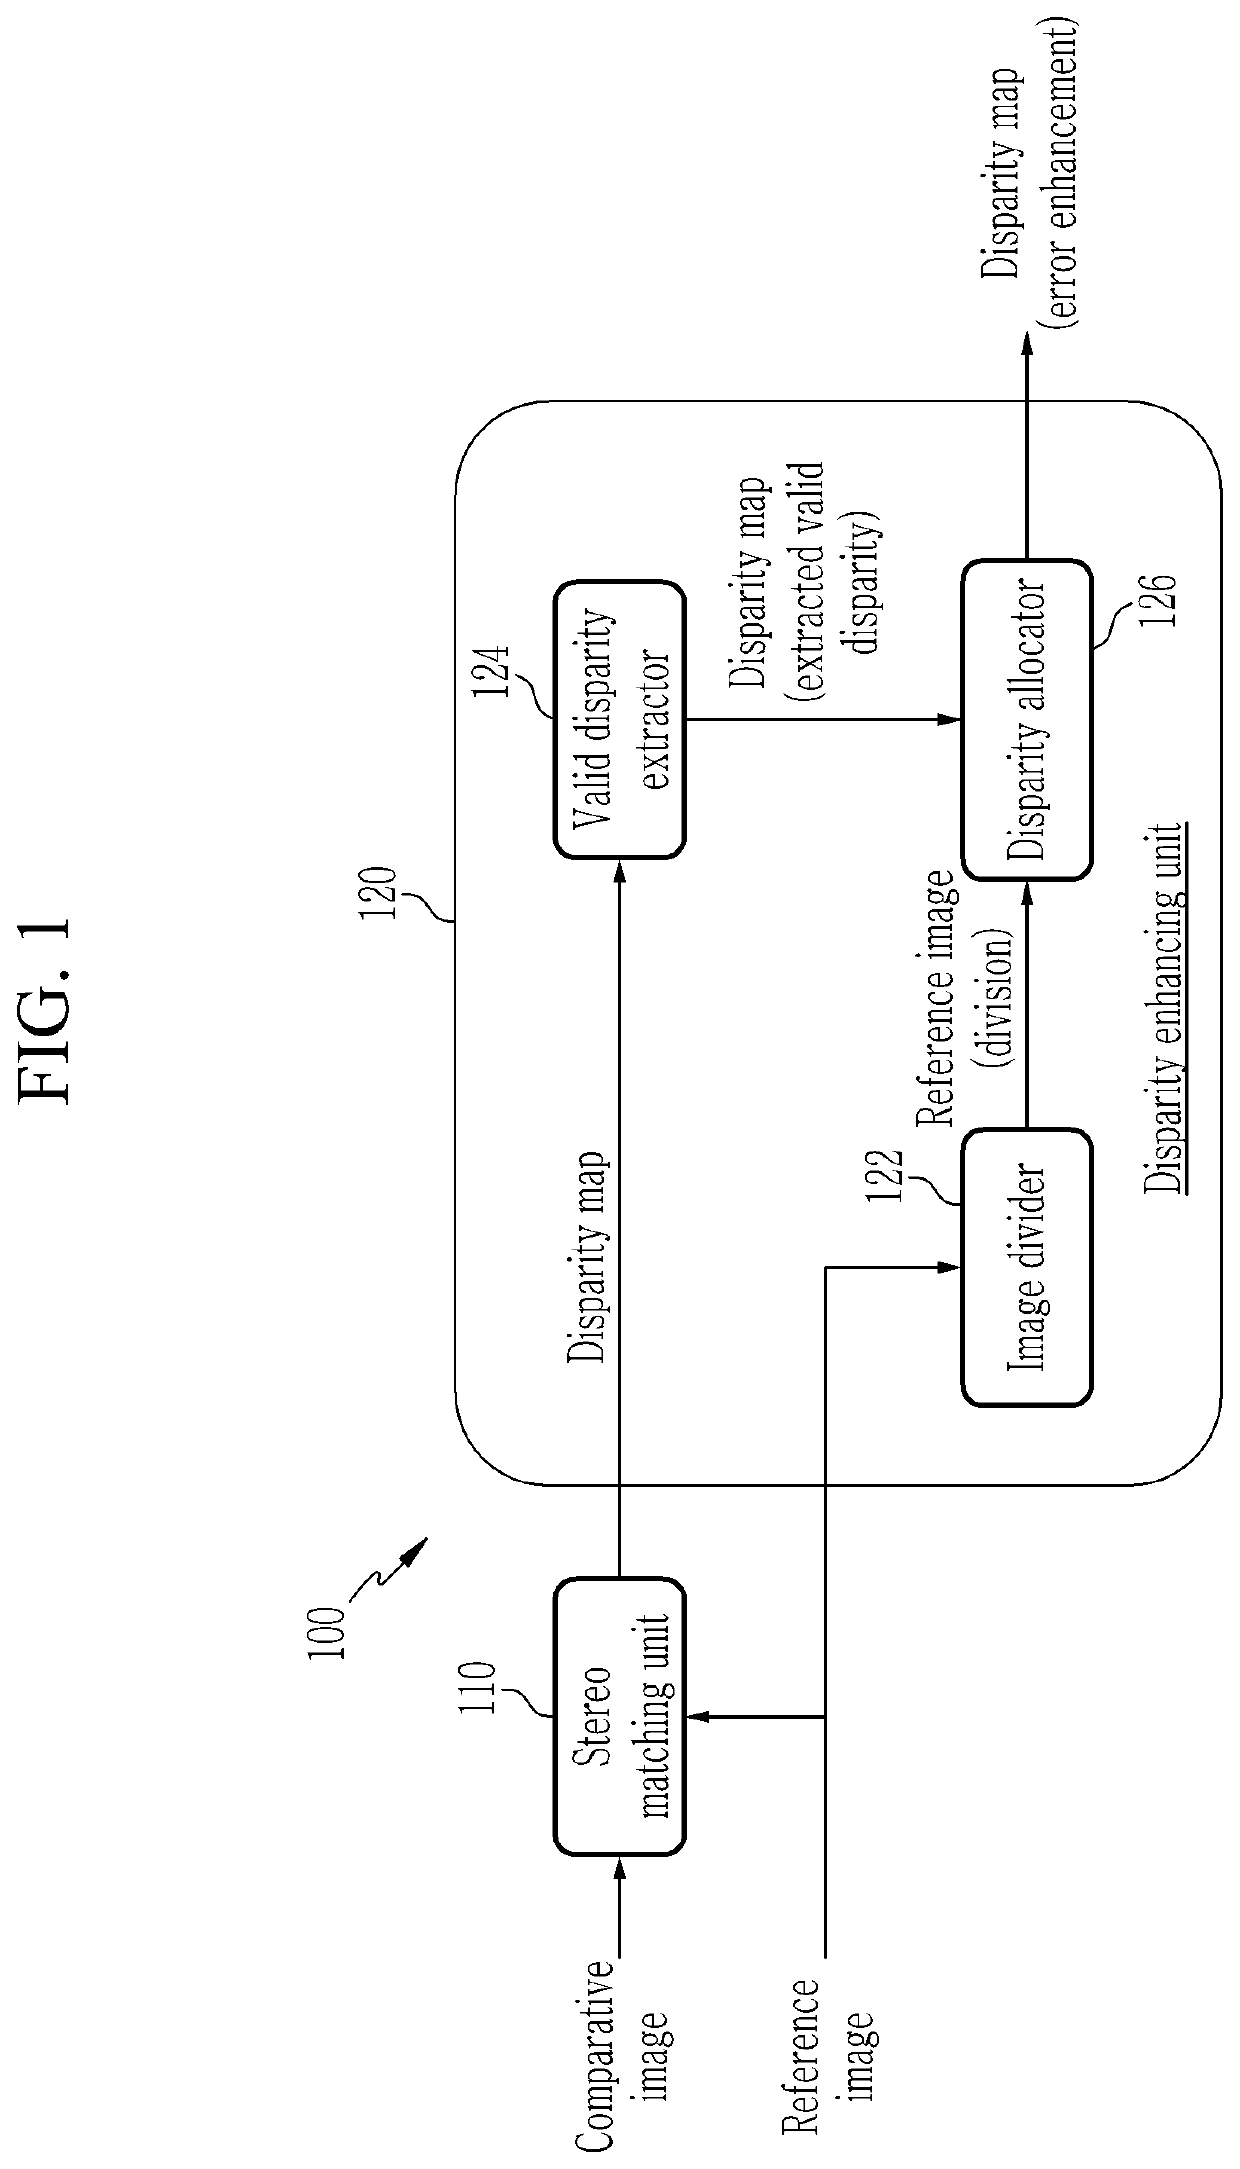 Method and apparatus for enhancing disparity map